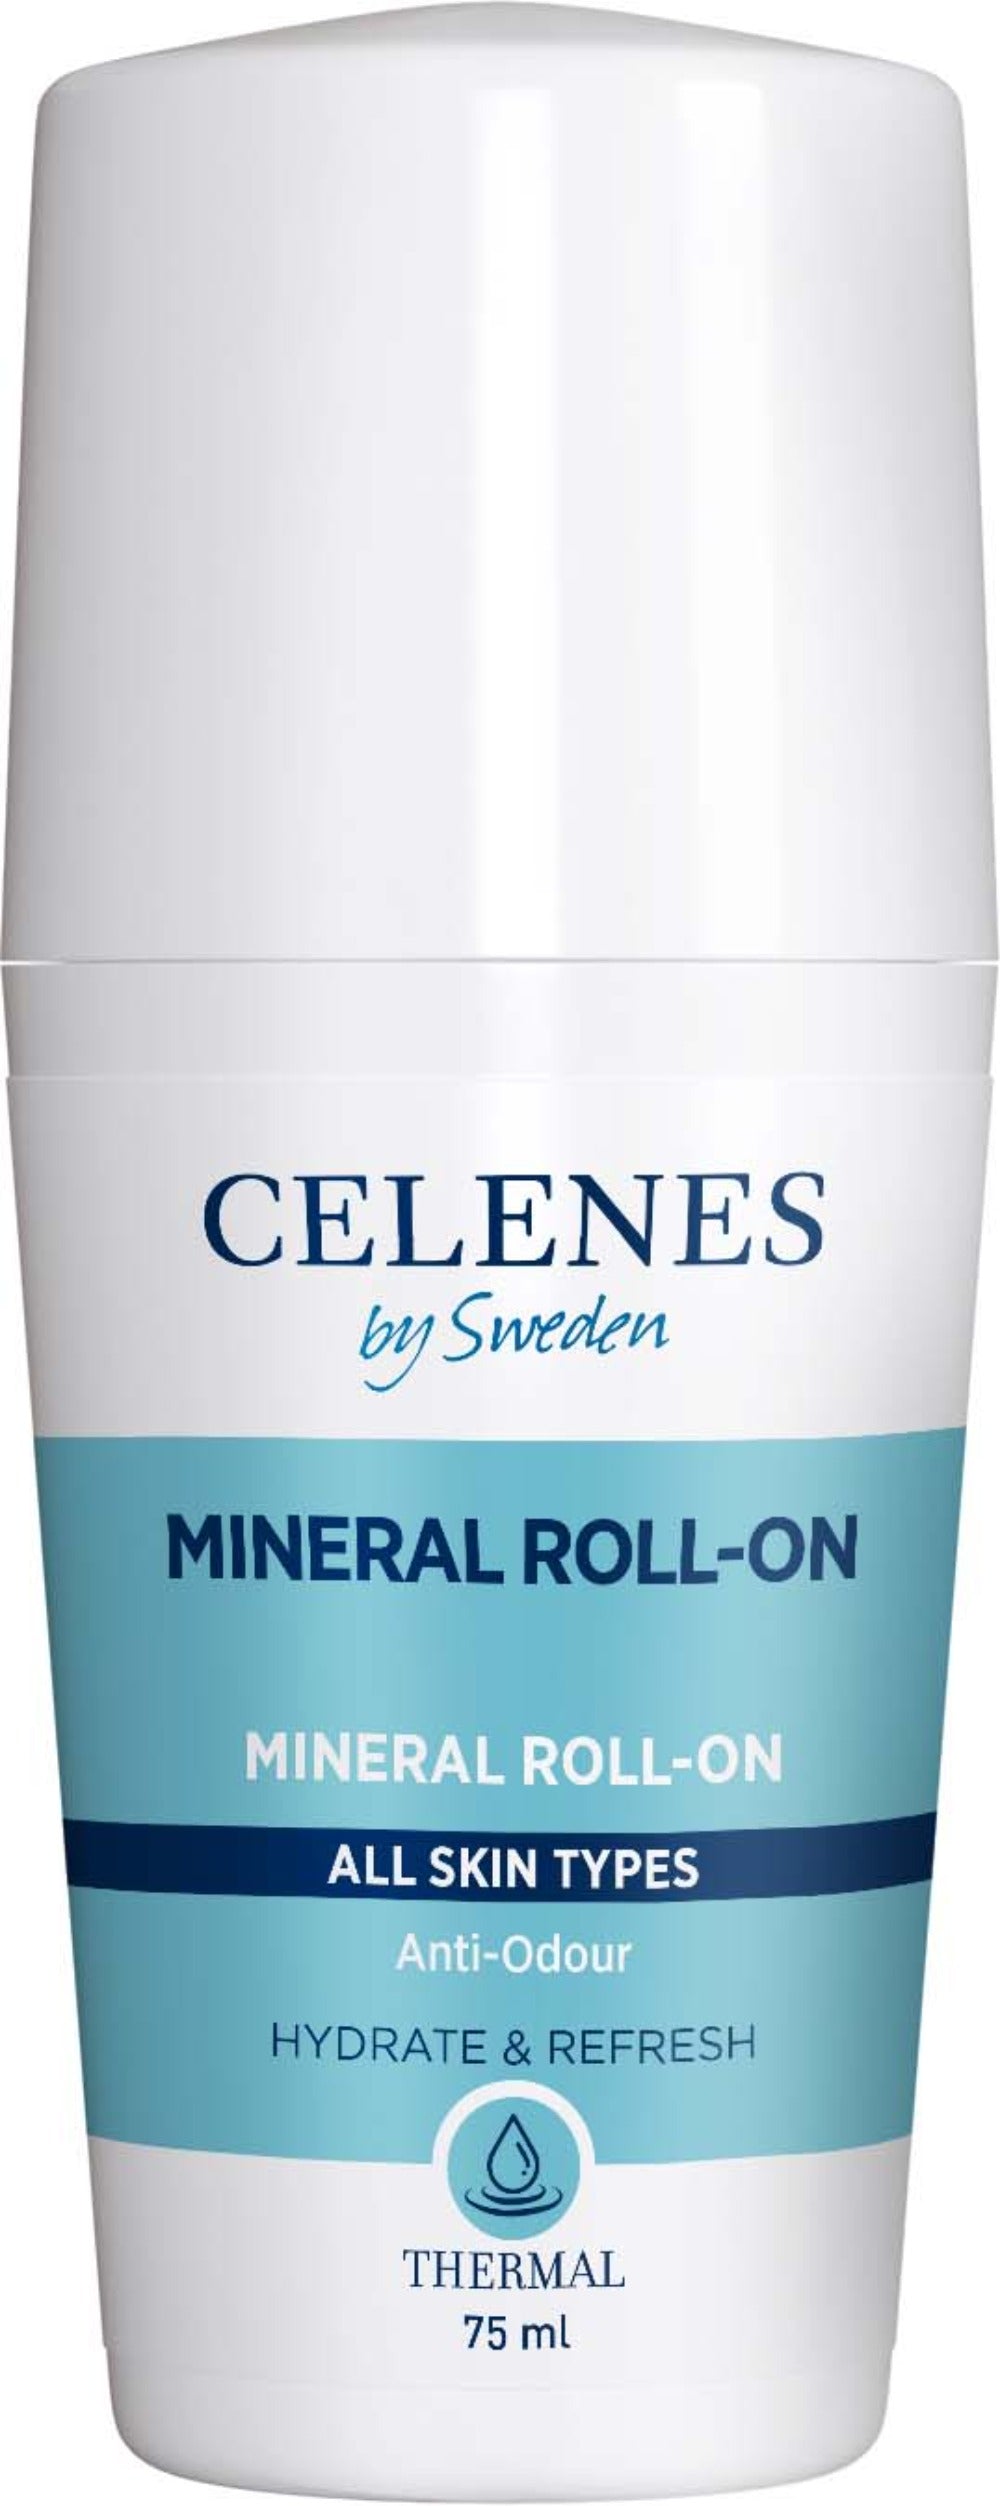 Celenes Thermal Mineral Roll-on All Skin Types- 75 ml